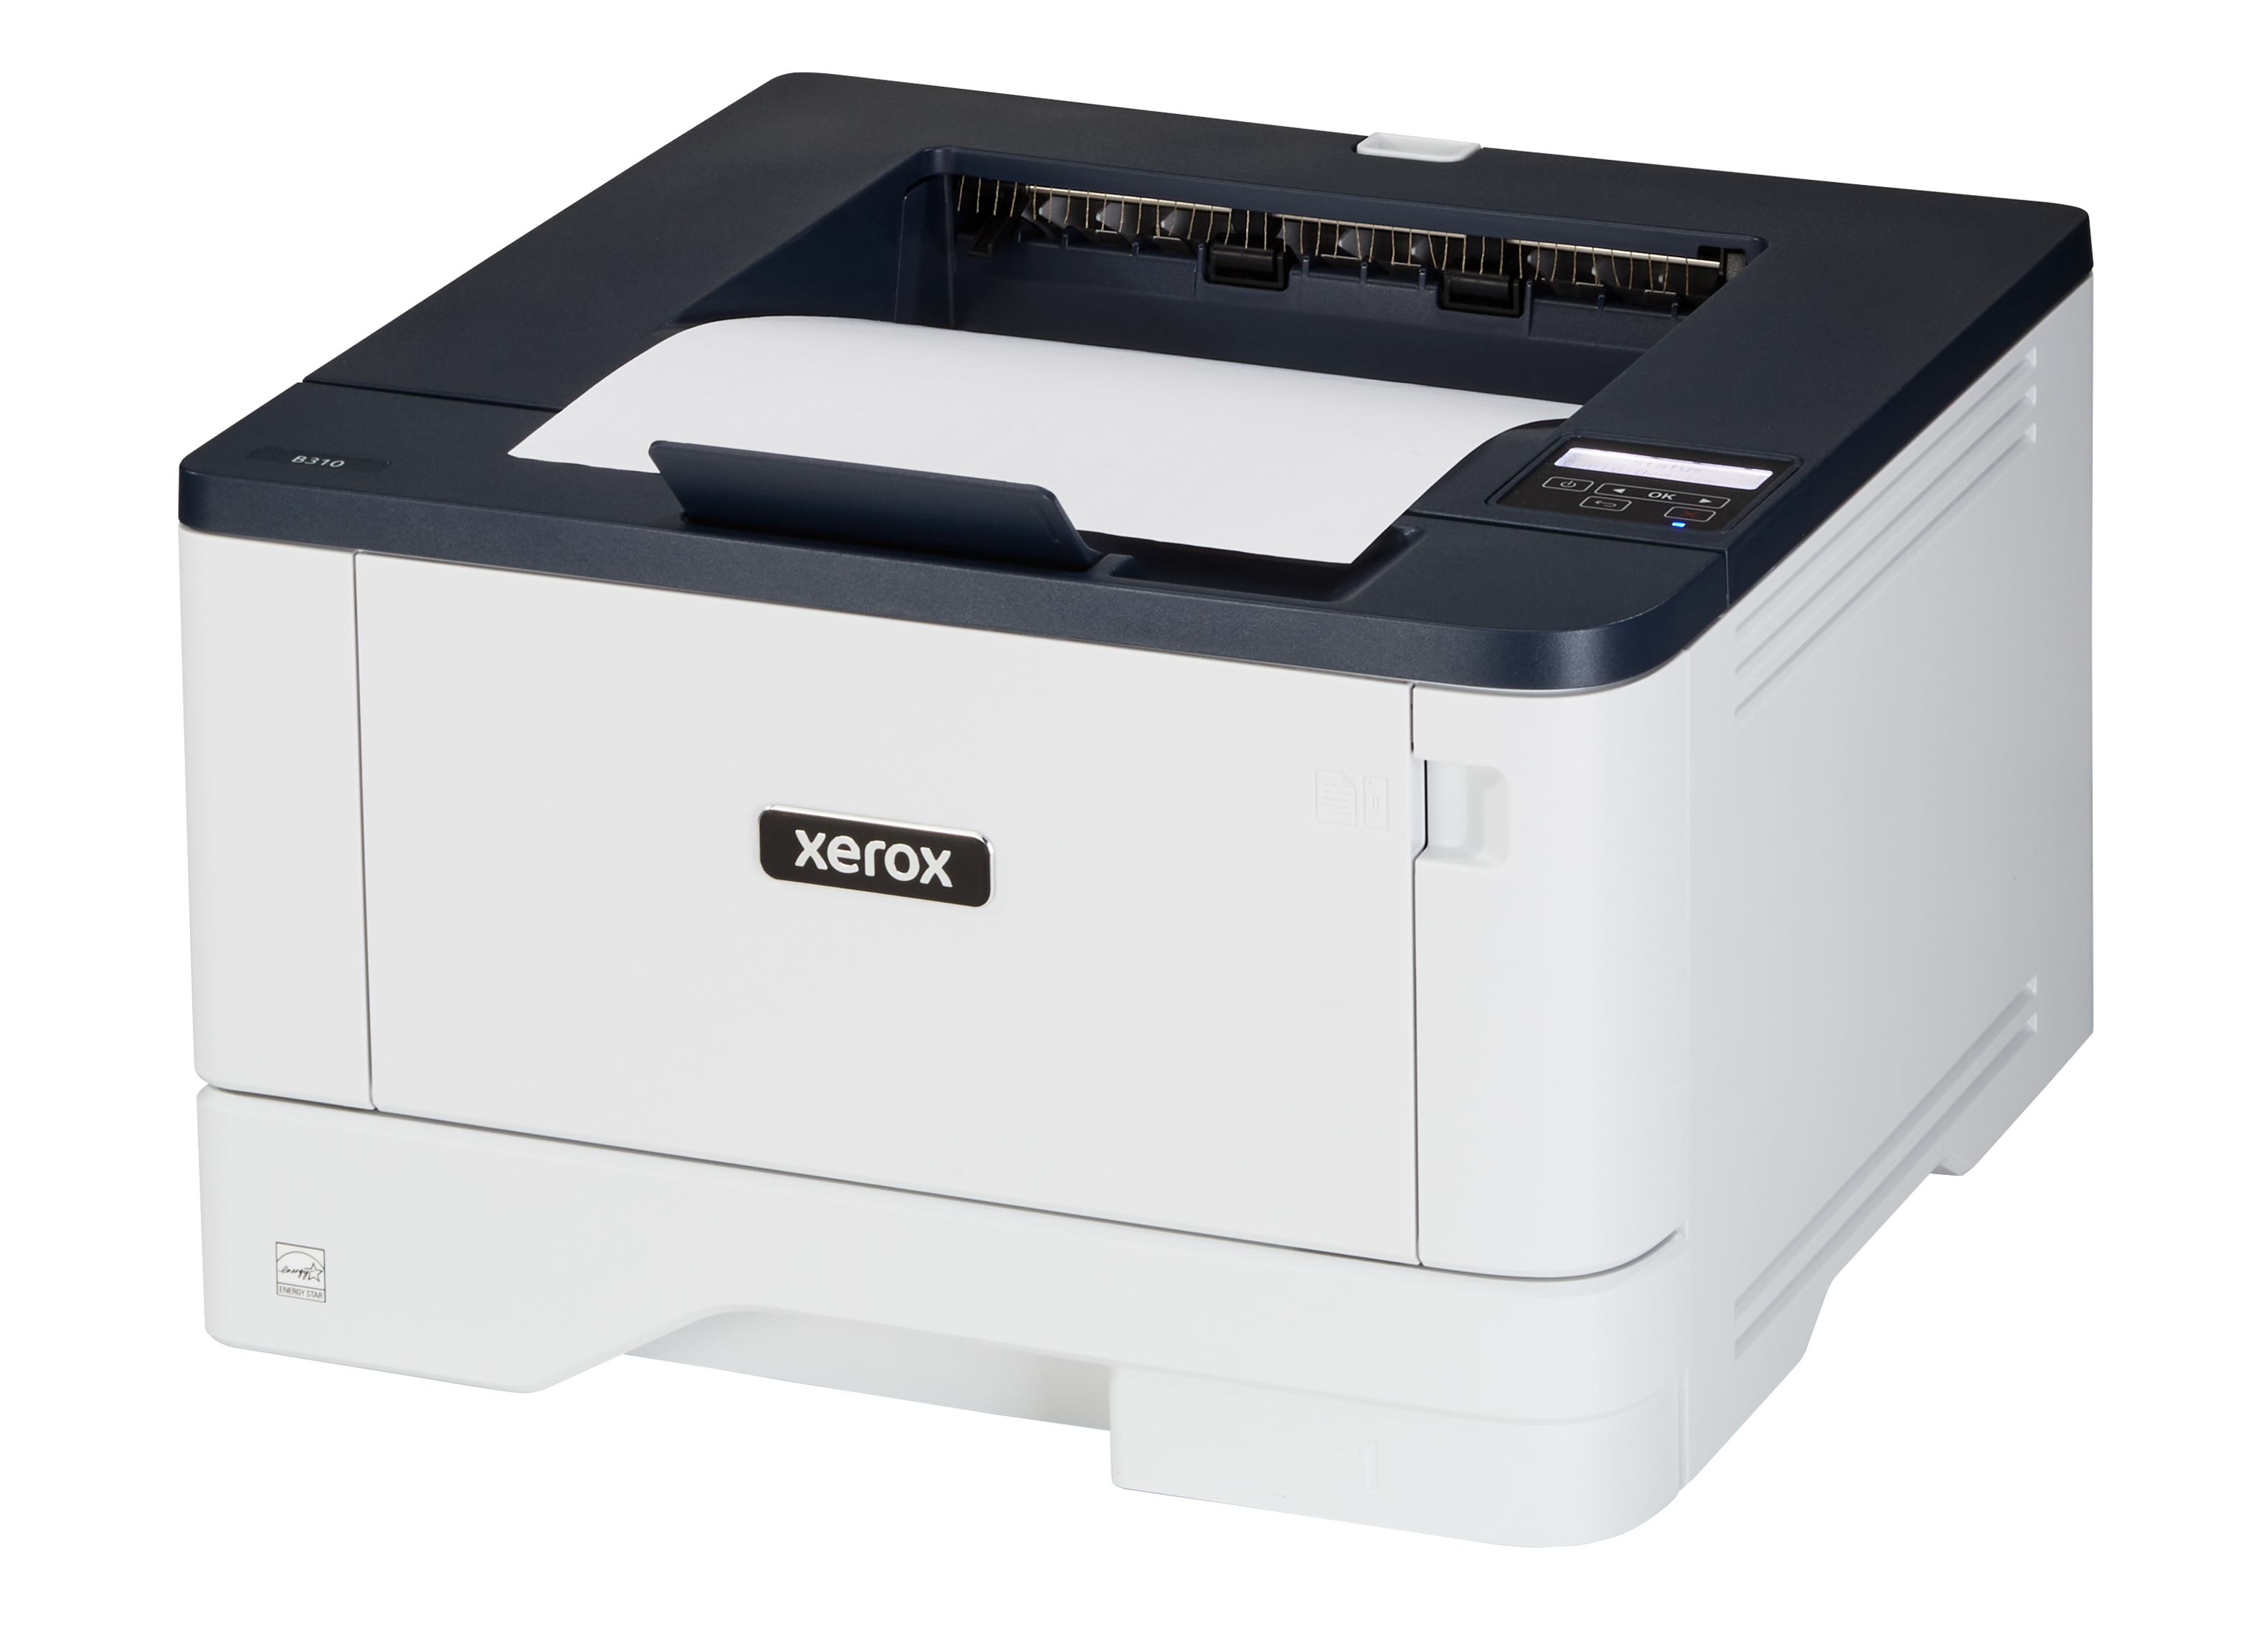 https://crdms.images.consumerreports.org/prod/products/cr/models/405778-black-and-white-laser-printers-xerox-b310-dni-10028941.png